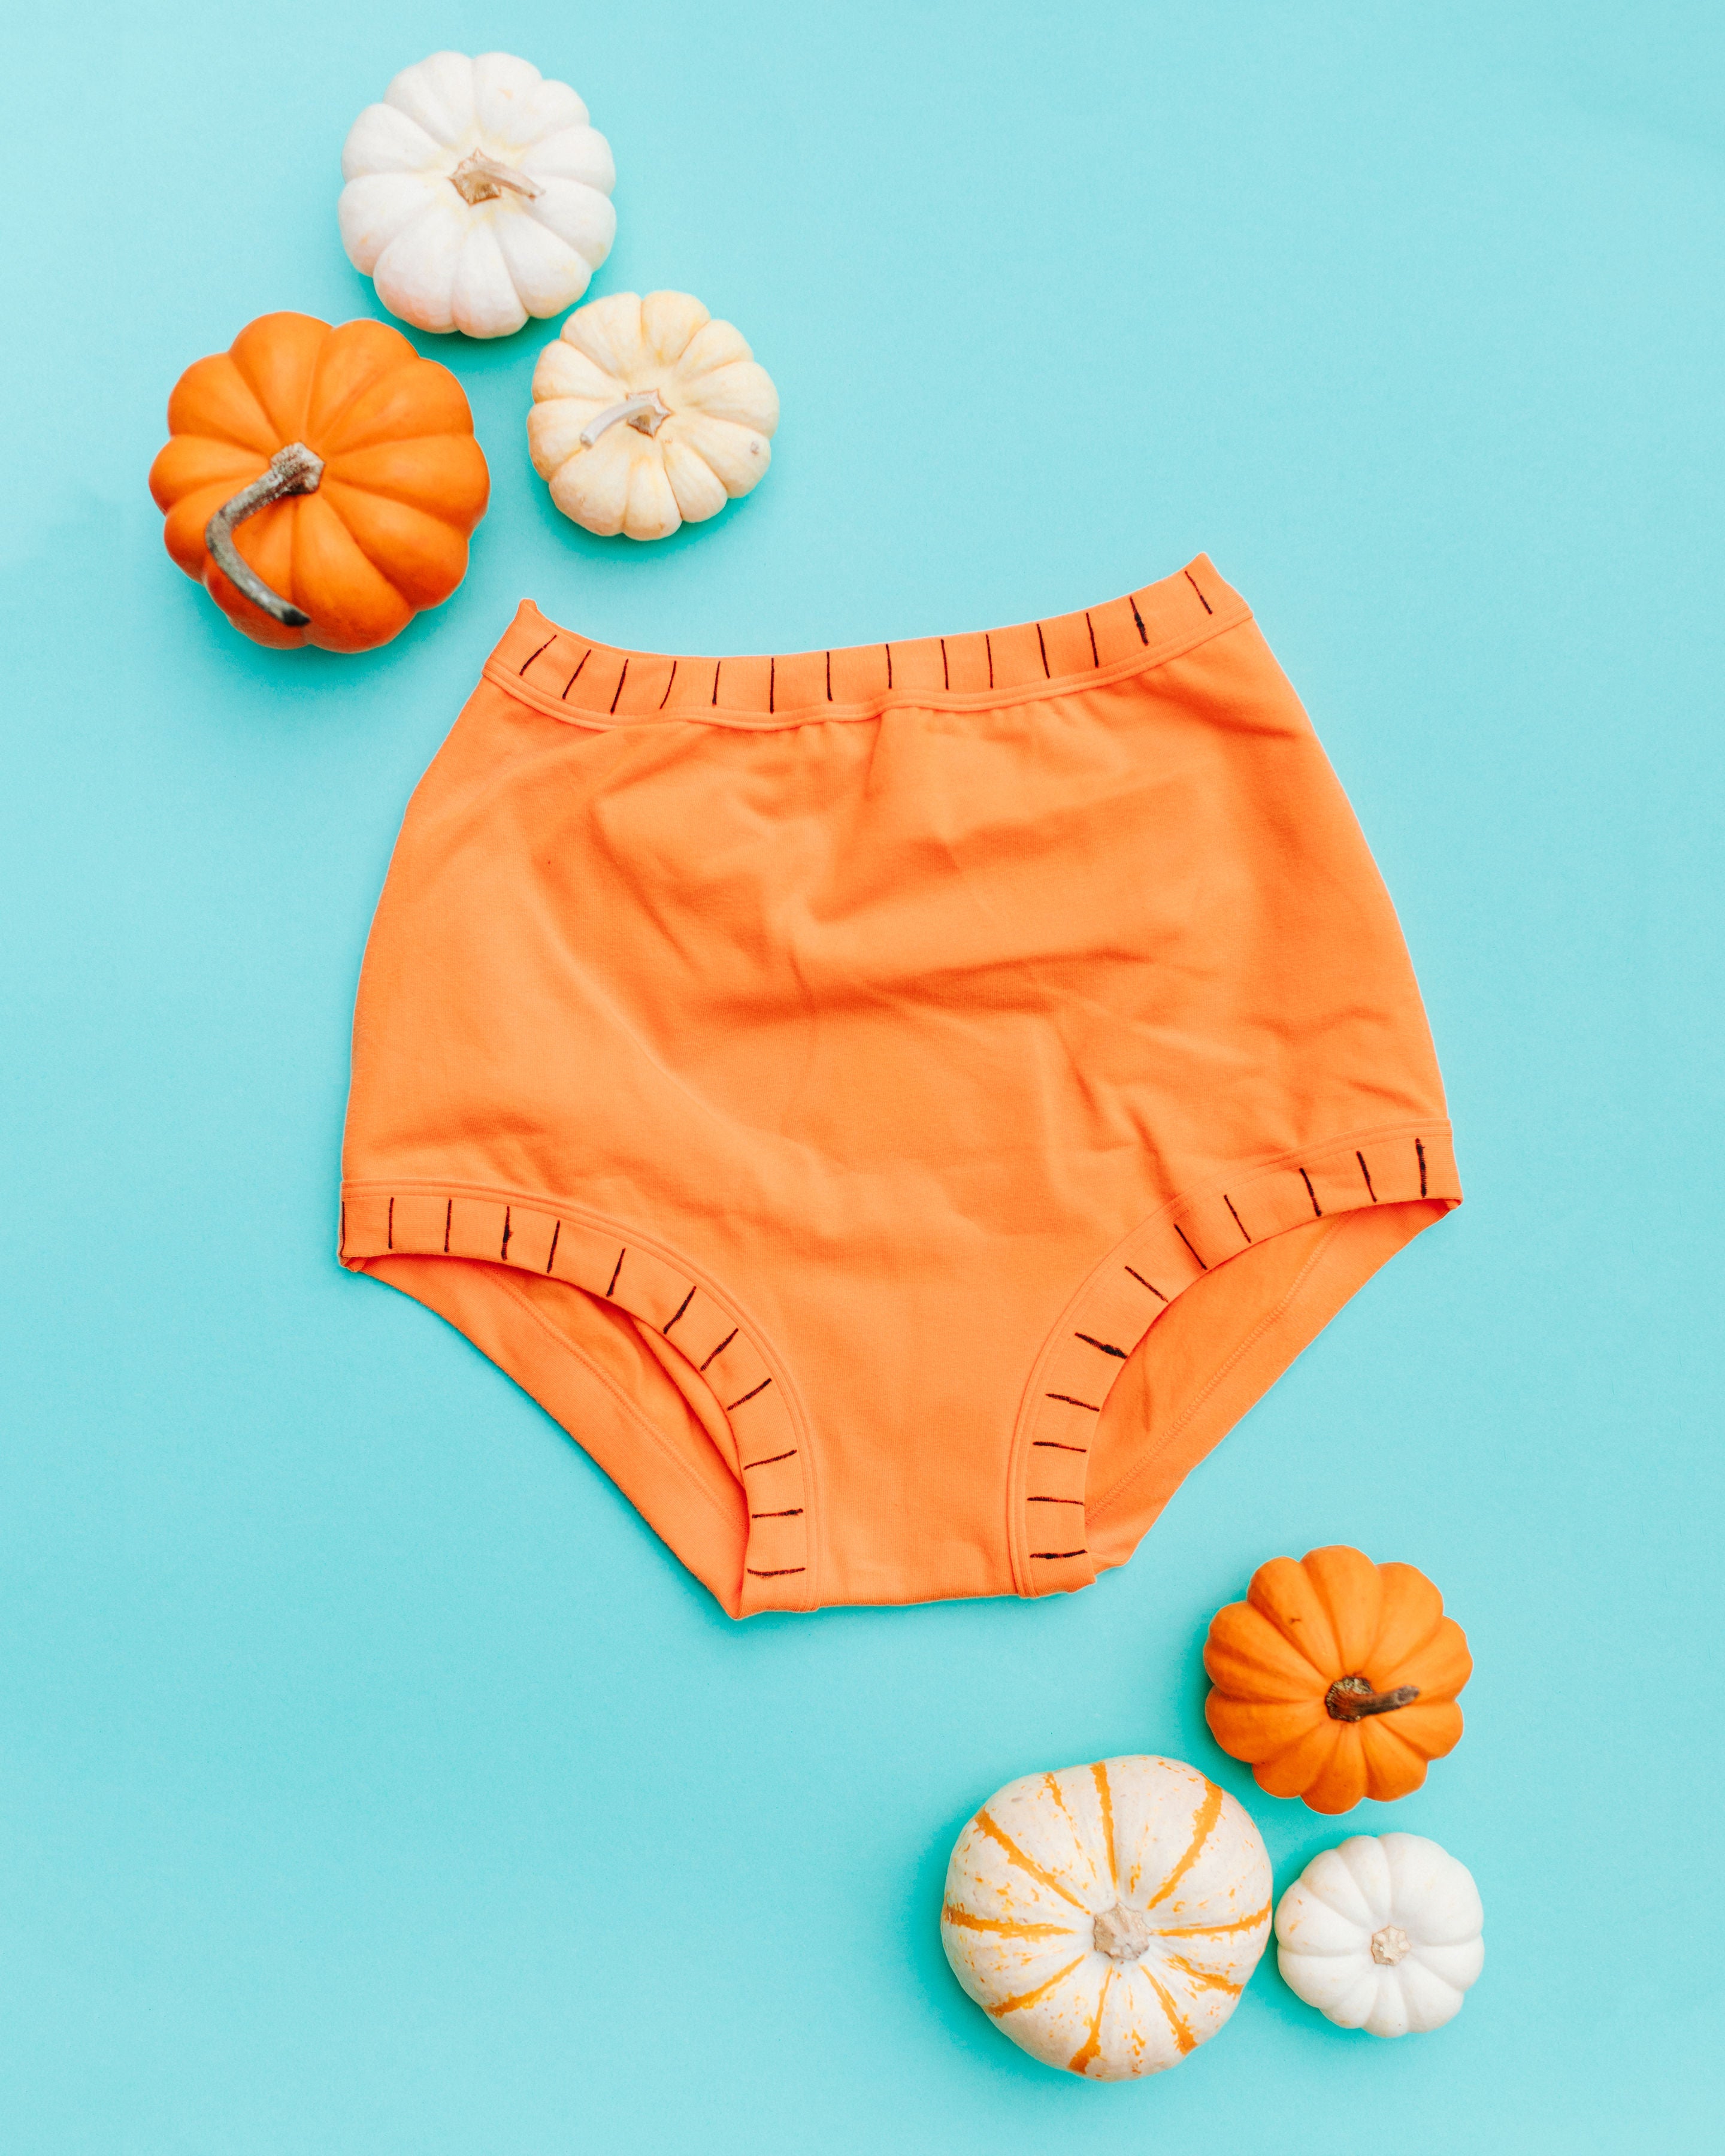 Flat lay of Thunderpants Sky Rise style underwear in Oregon Sunstone.